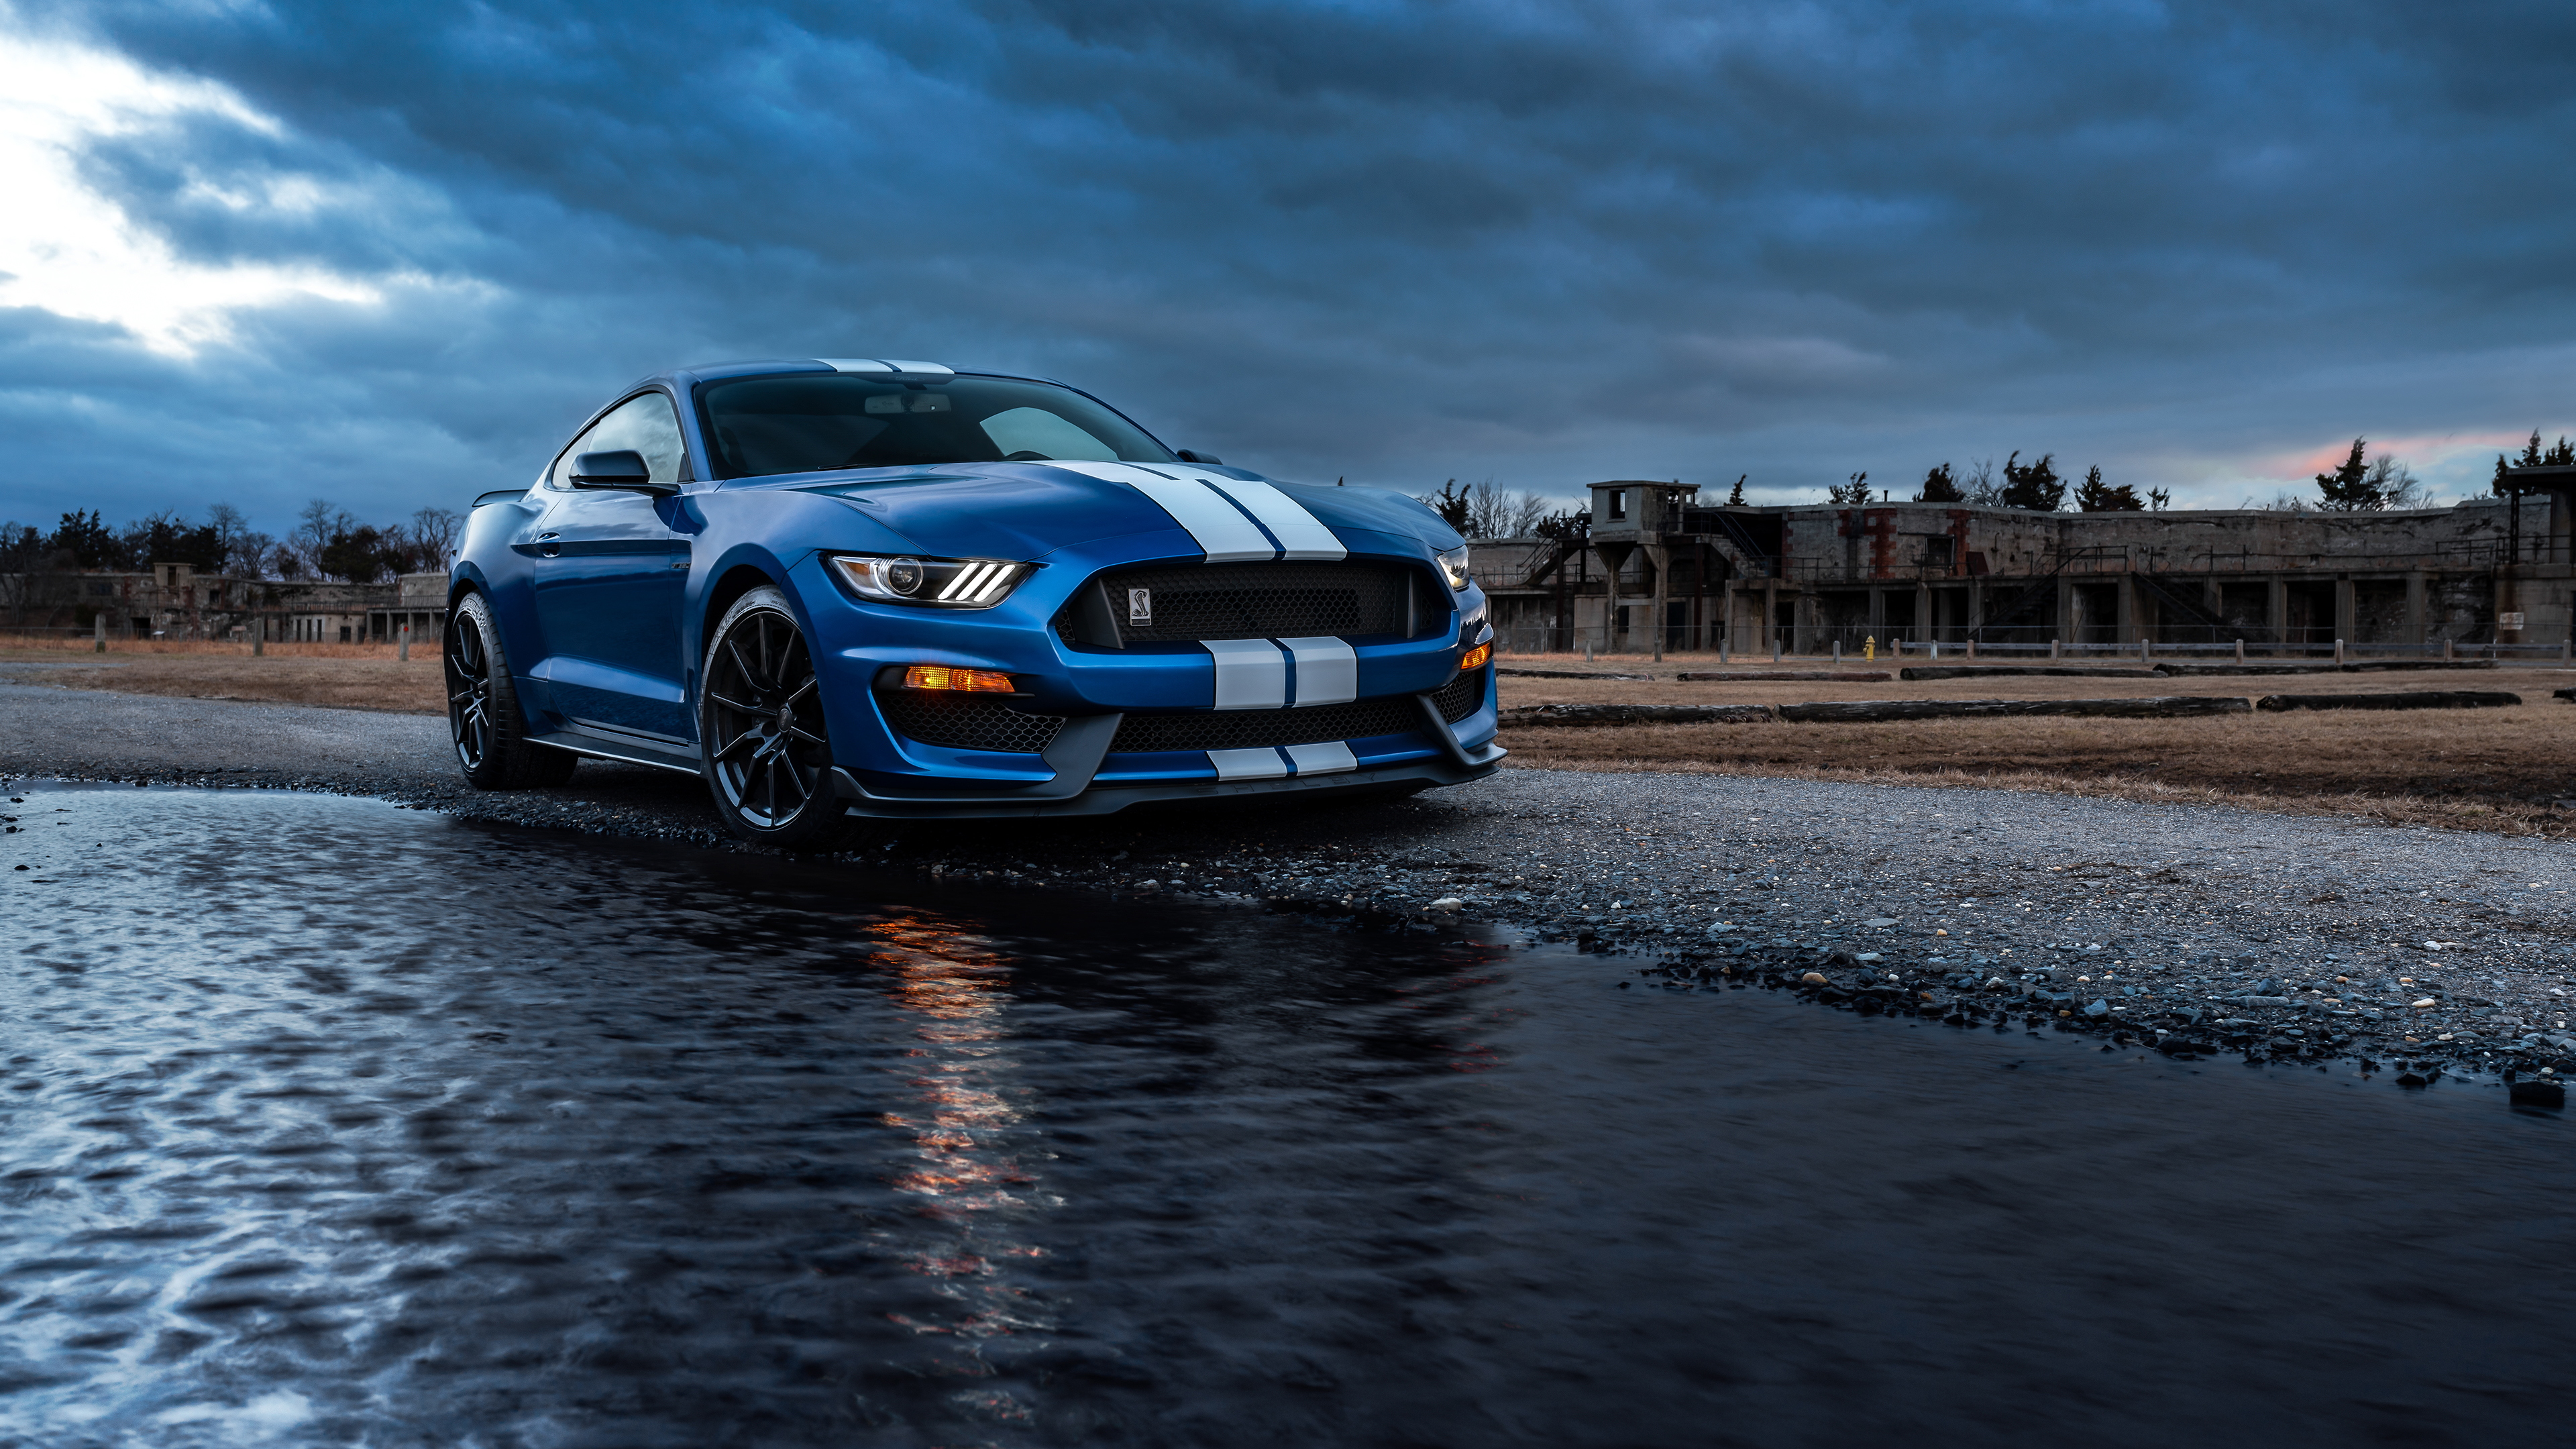 General 3840x2160 Ford Shelby car vehicle muscle cars blue cars Ford Mustang Shelby Ford Mustang Ford Mustang S550 American cars racing stripes